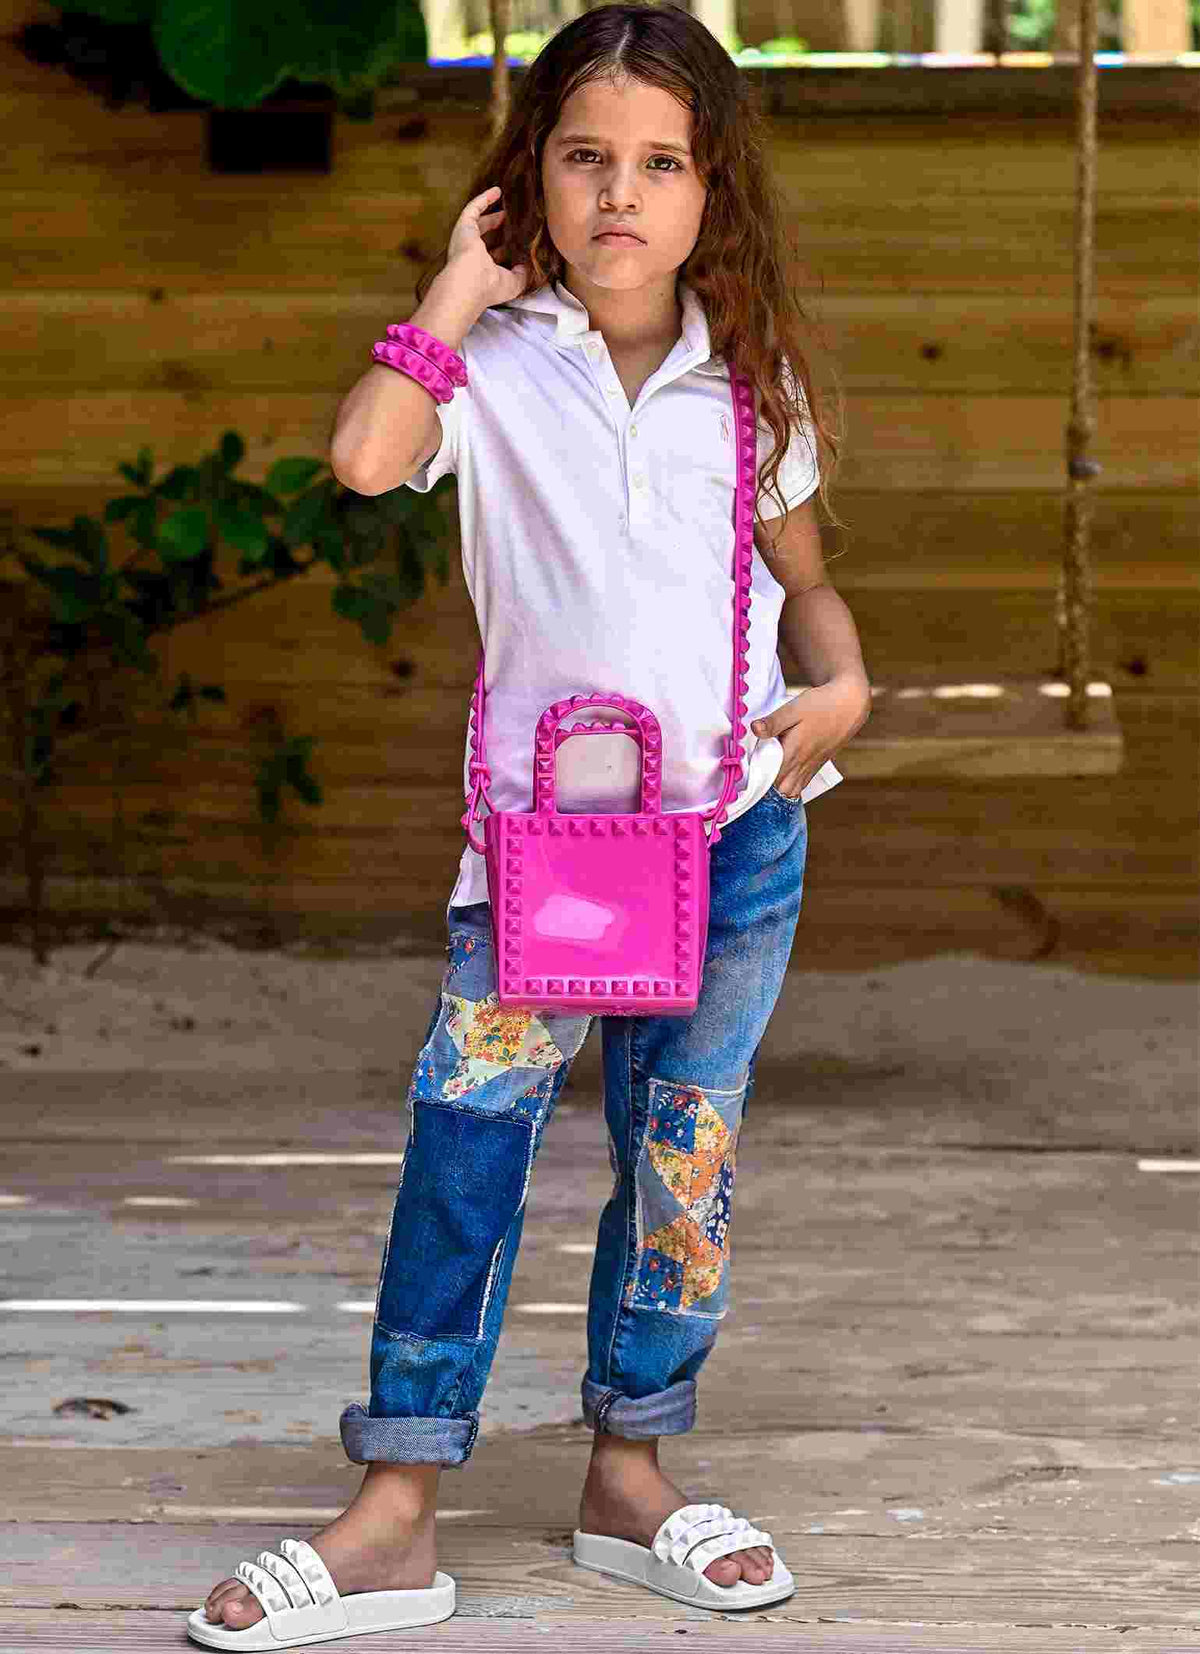 Fuschia jelly crossbody bag for kids. Complete barbie outfit from minicarmensol for kids.